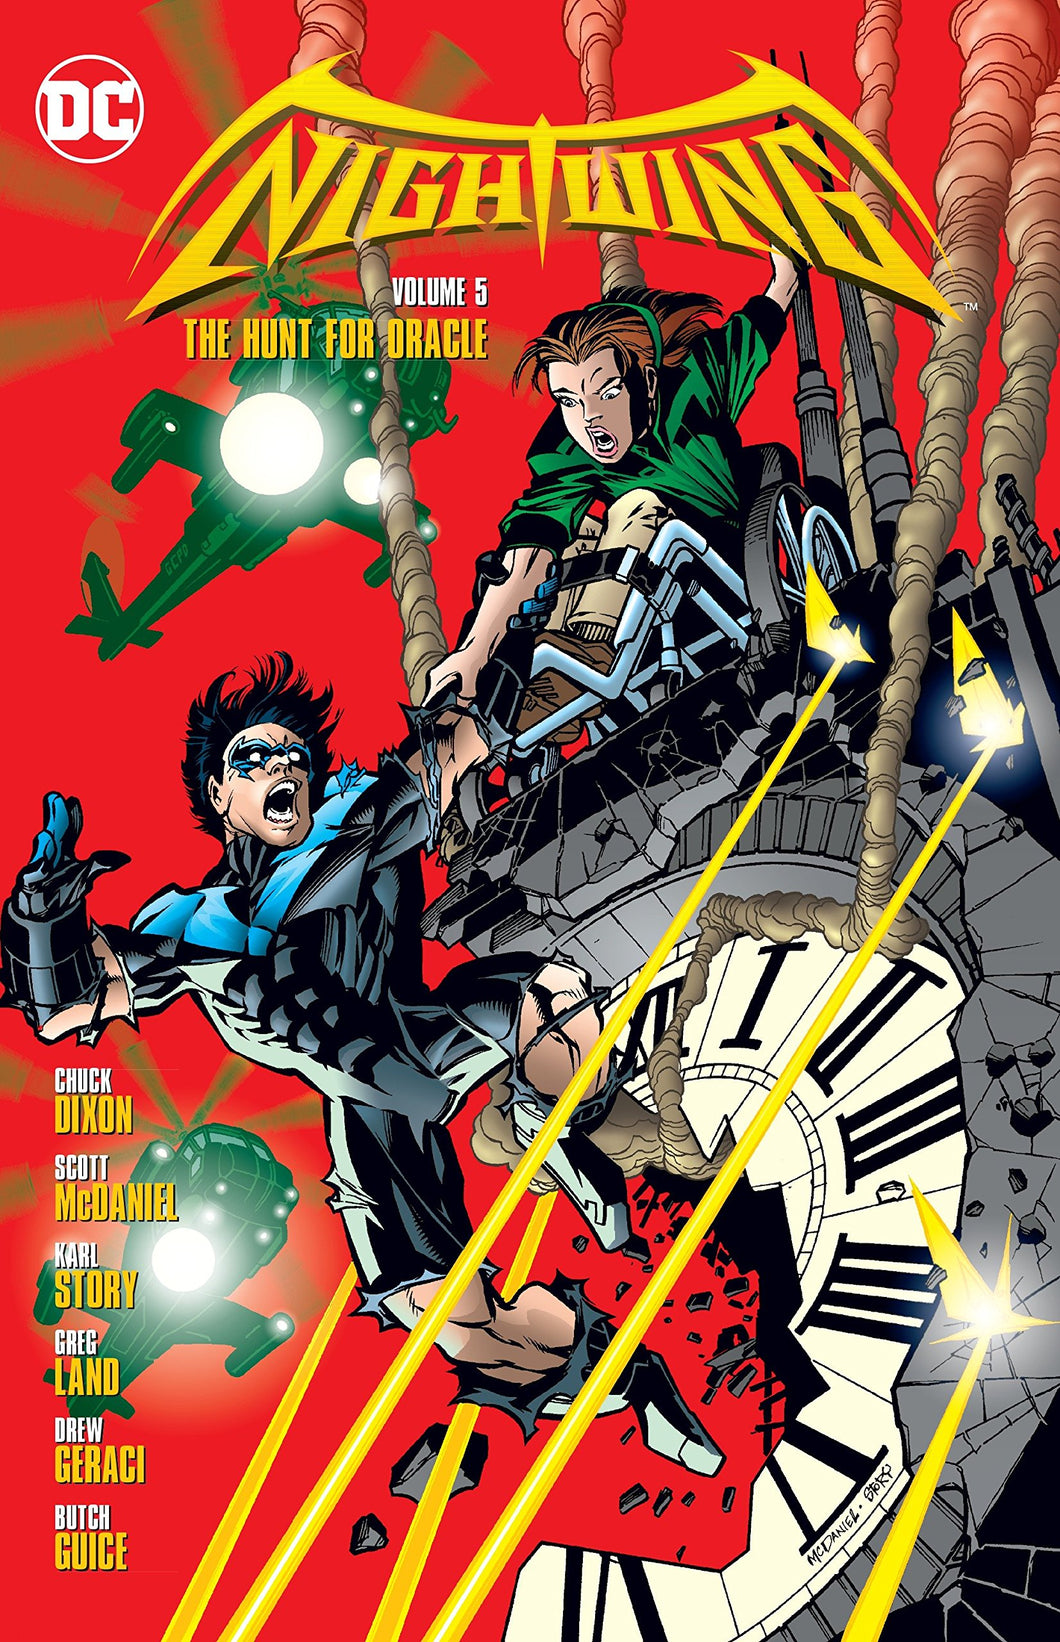 Nightwing Vol. 5 : The Hunt For Oracle